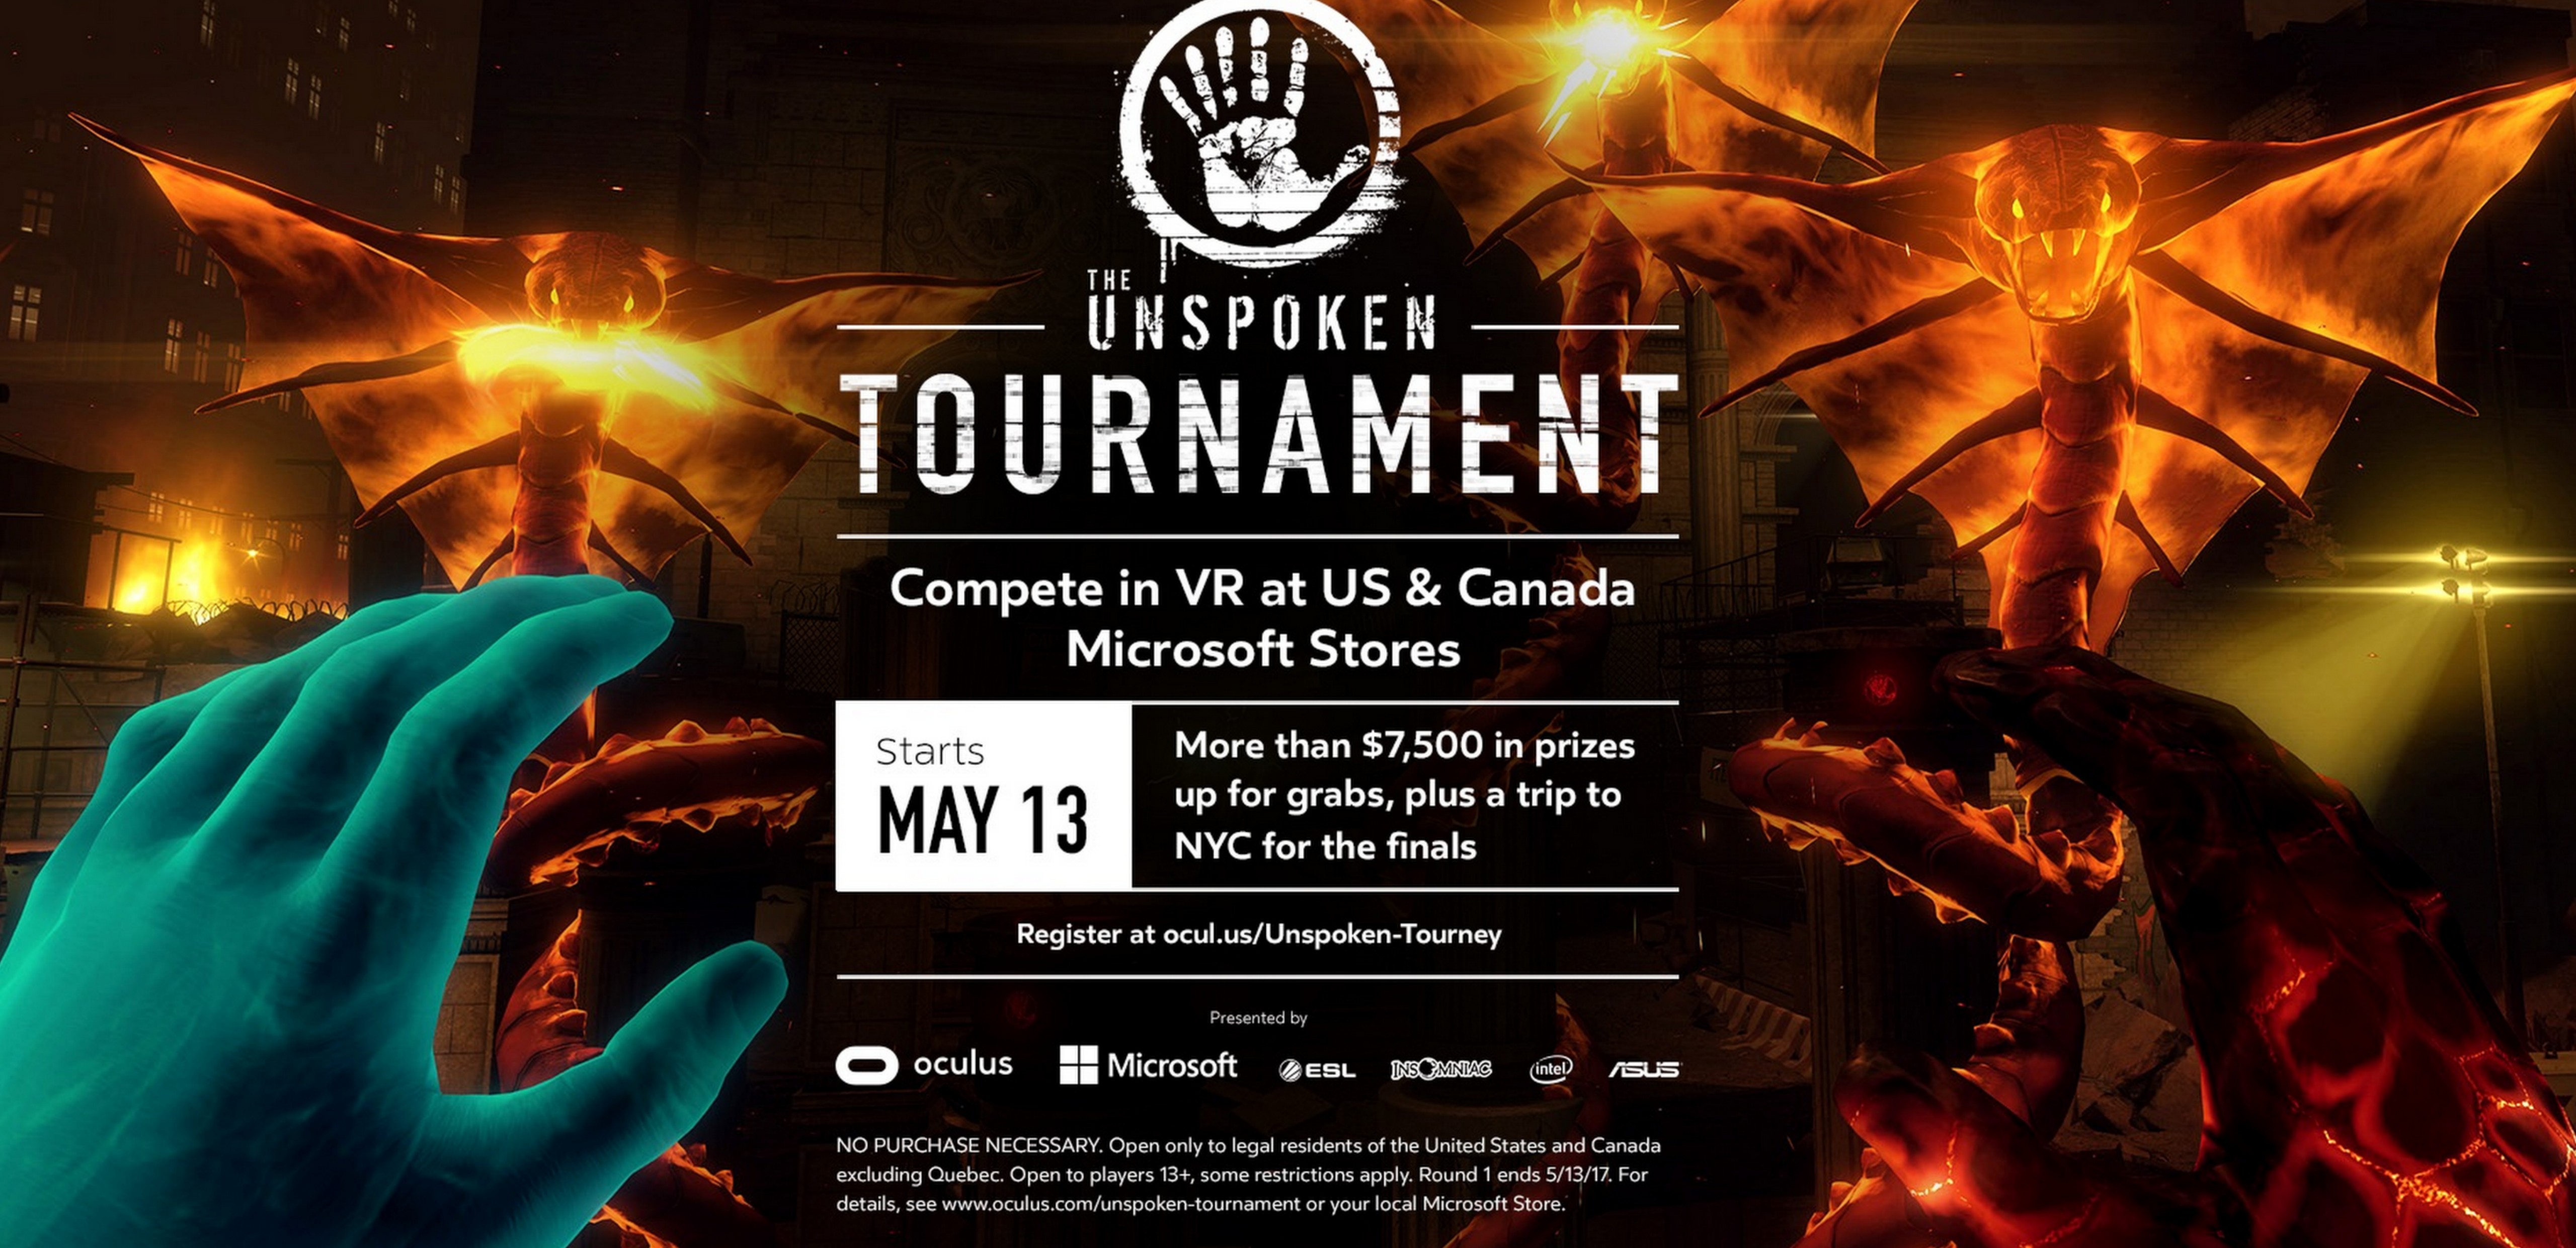 The Unspoken VR Tournament is coming soon to select Microsoft Stores in the U.S. and Canada